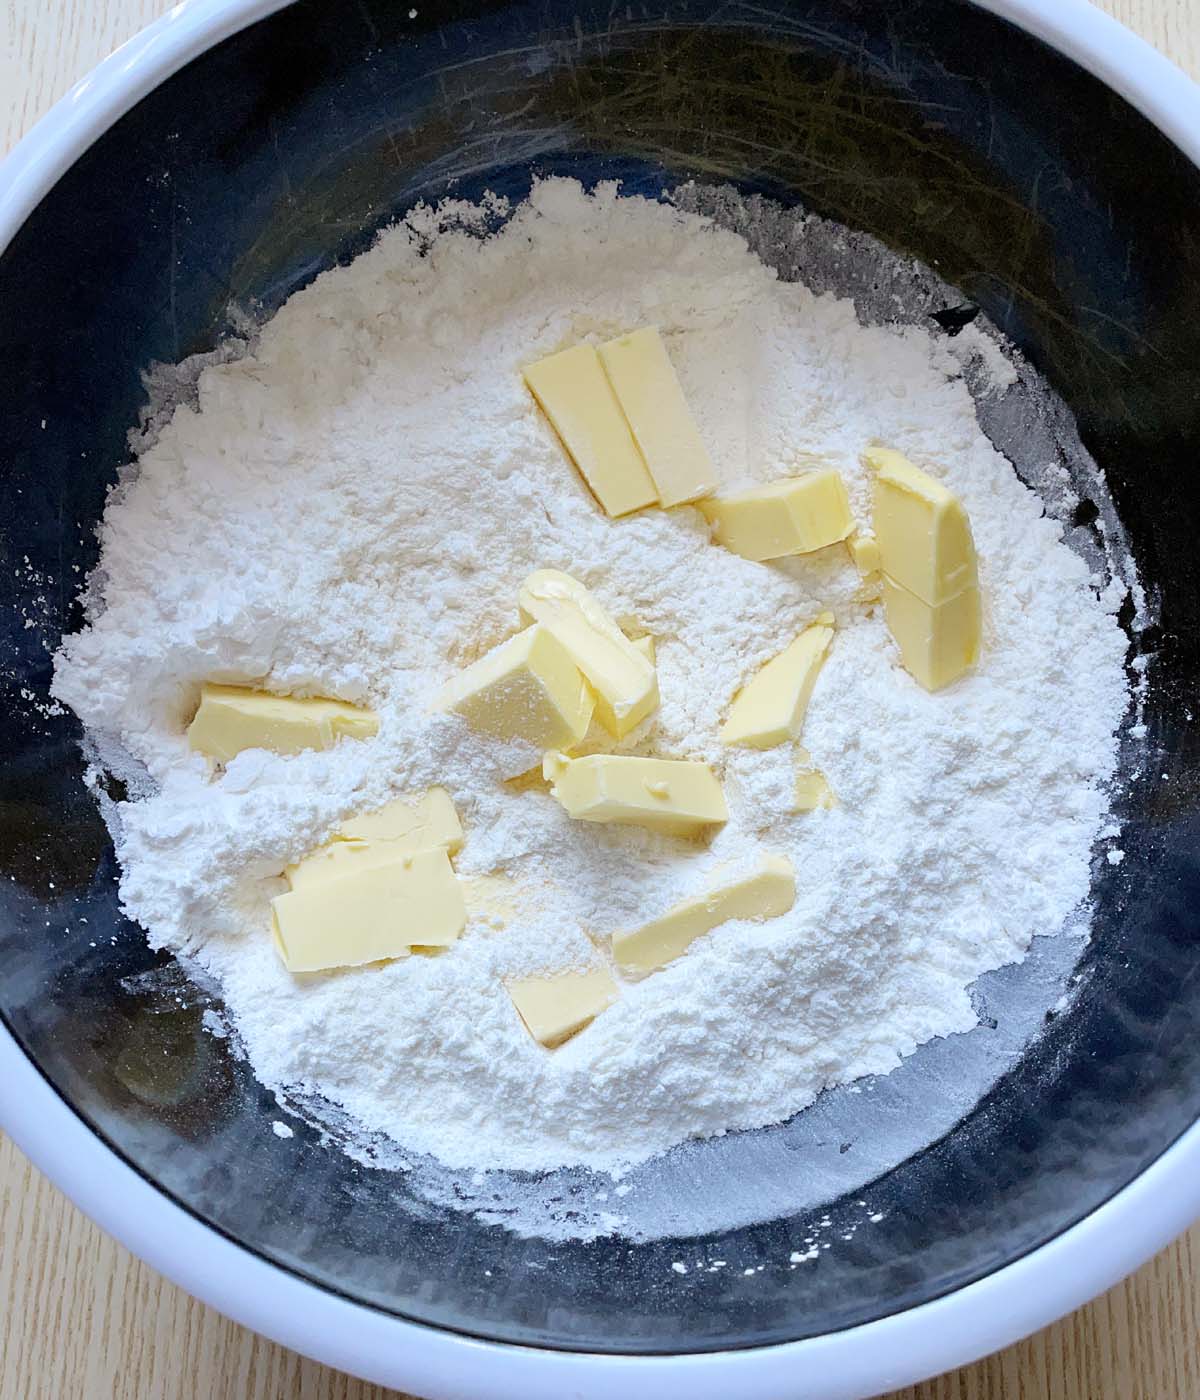 A round black bowl containing white flours and chunks of yellow butter.